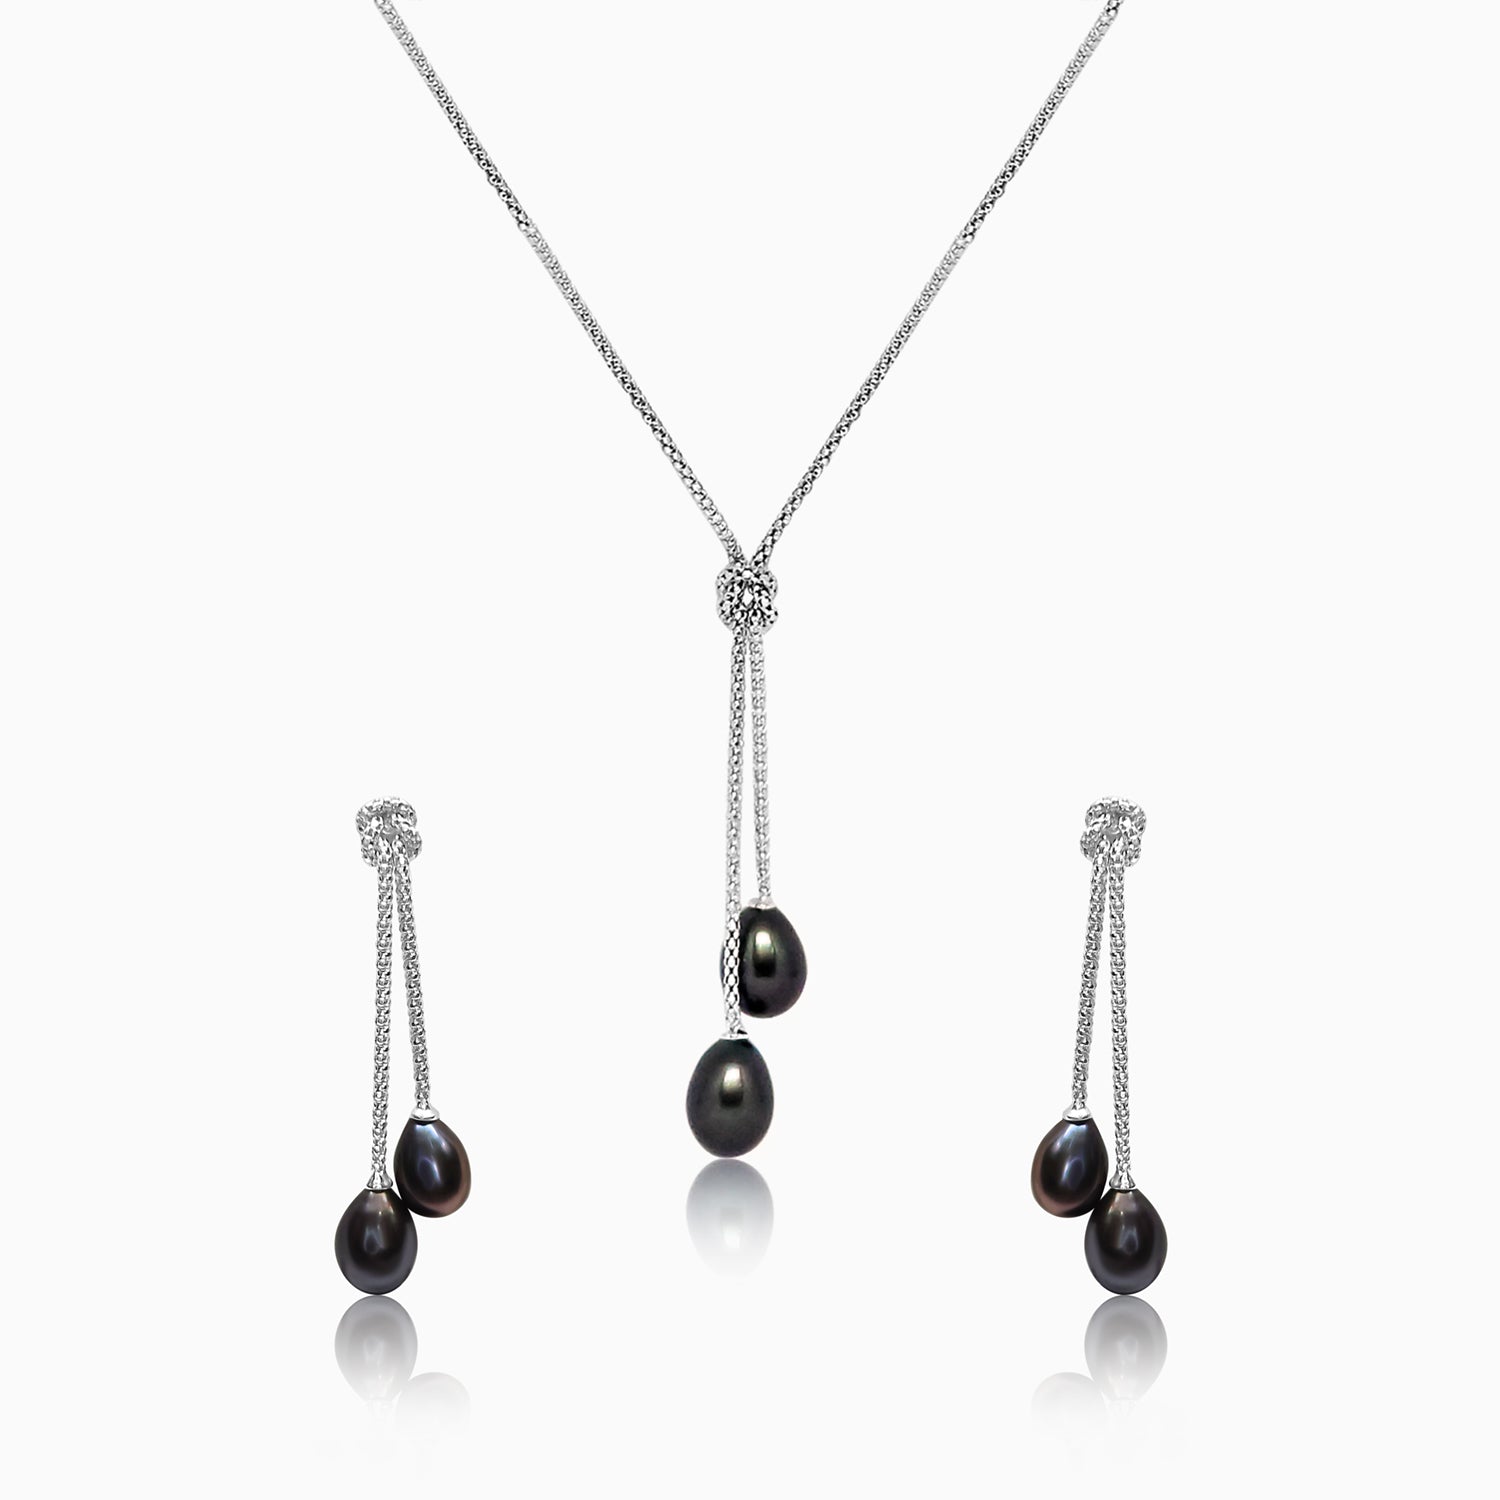 Silver Knotted Italian Chain Black Pearl Necklace Set